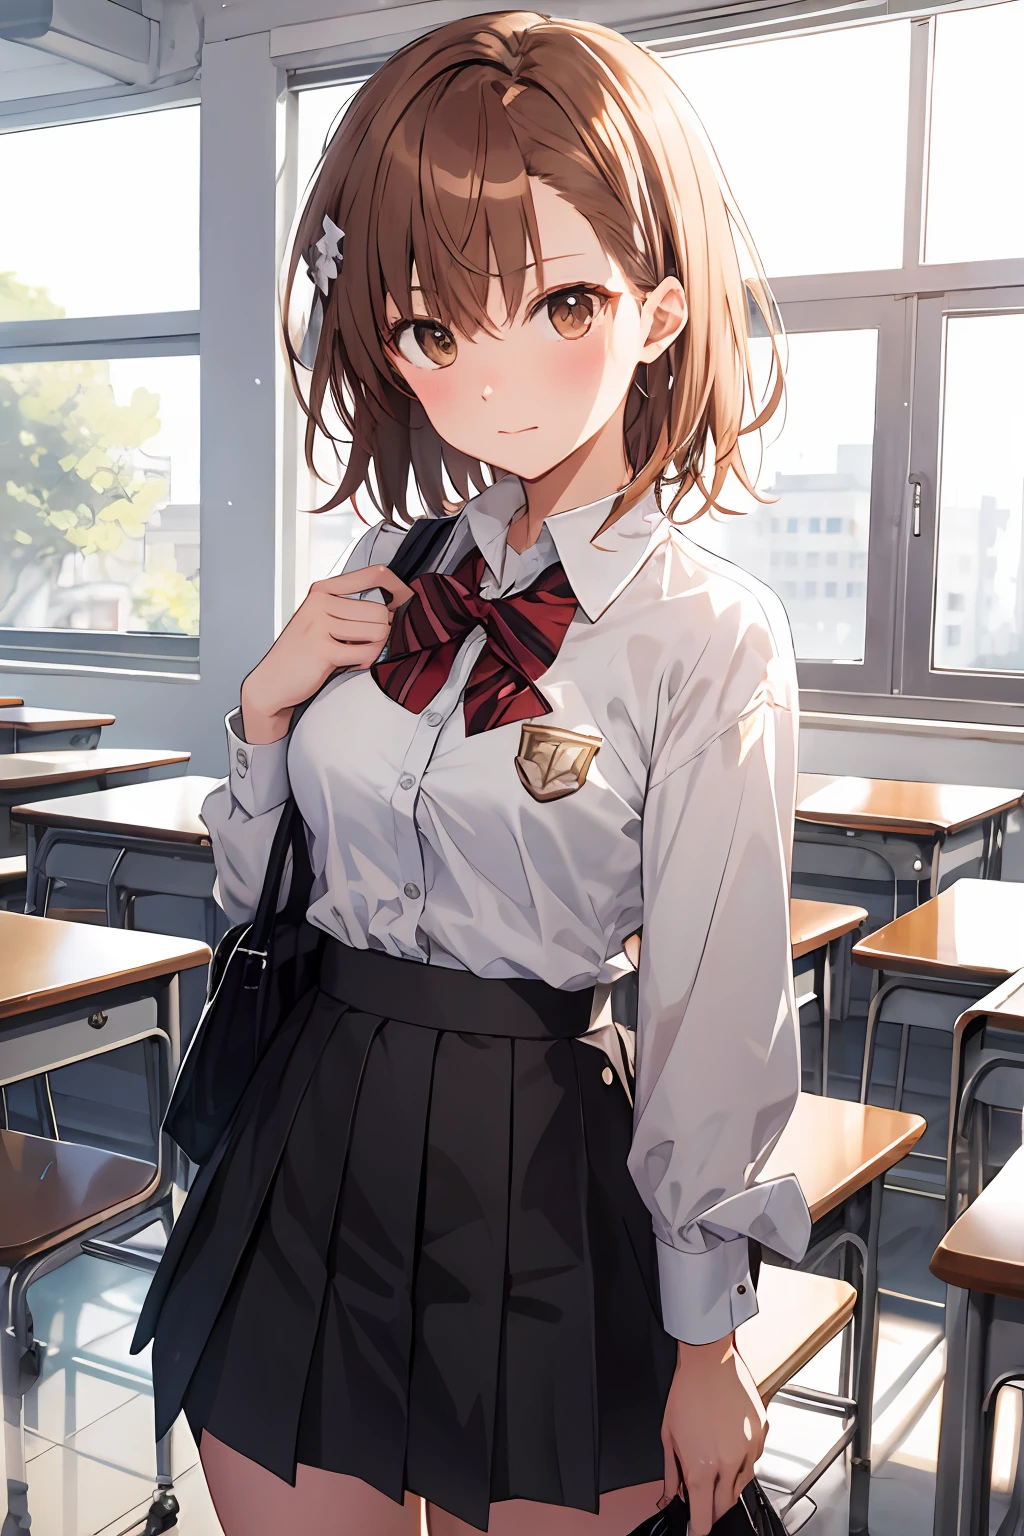 The Masterpiece, best qualiy, Misaka_mikoto, brown eyess, Short_hair, Small_Breast, looking at the viewers, solo, Closed_Mouth, collars_Shirt, School_uniform, shirts, whited_Shirt, , class room　full bodied　miniskirts